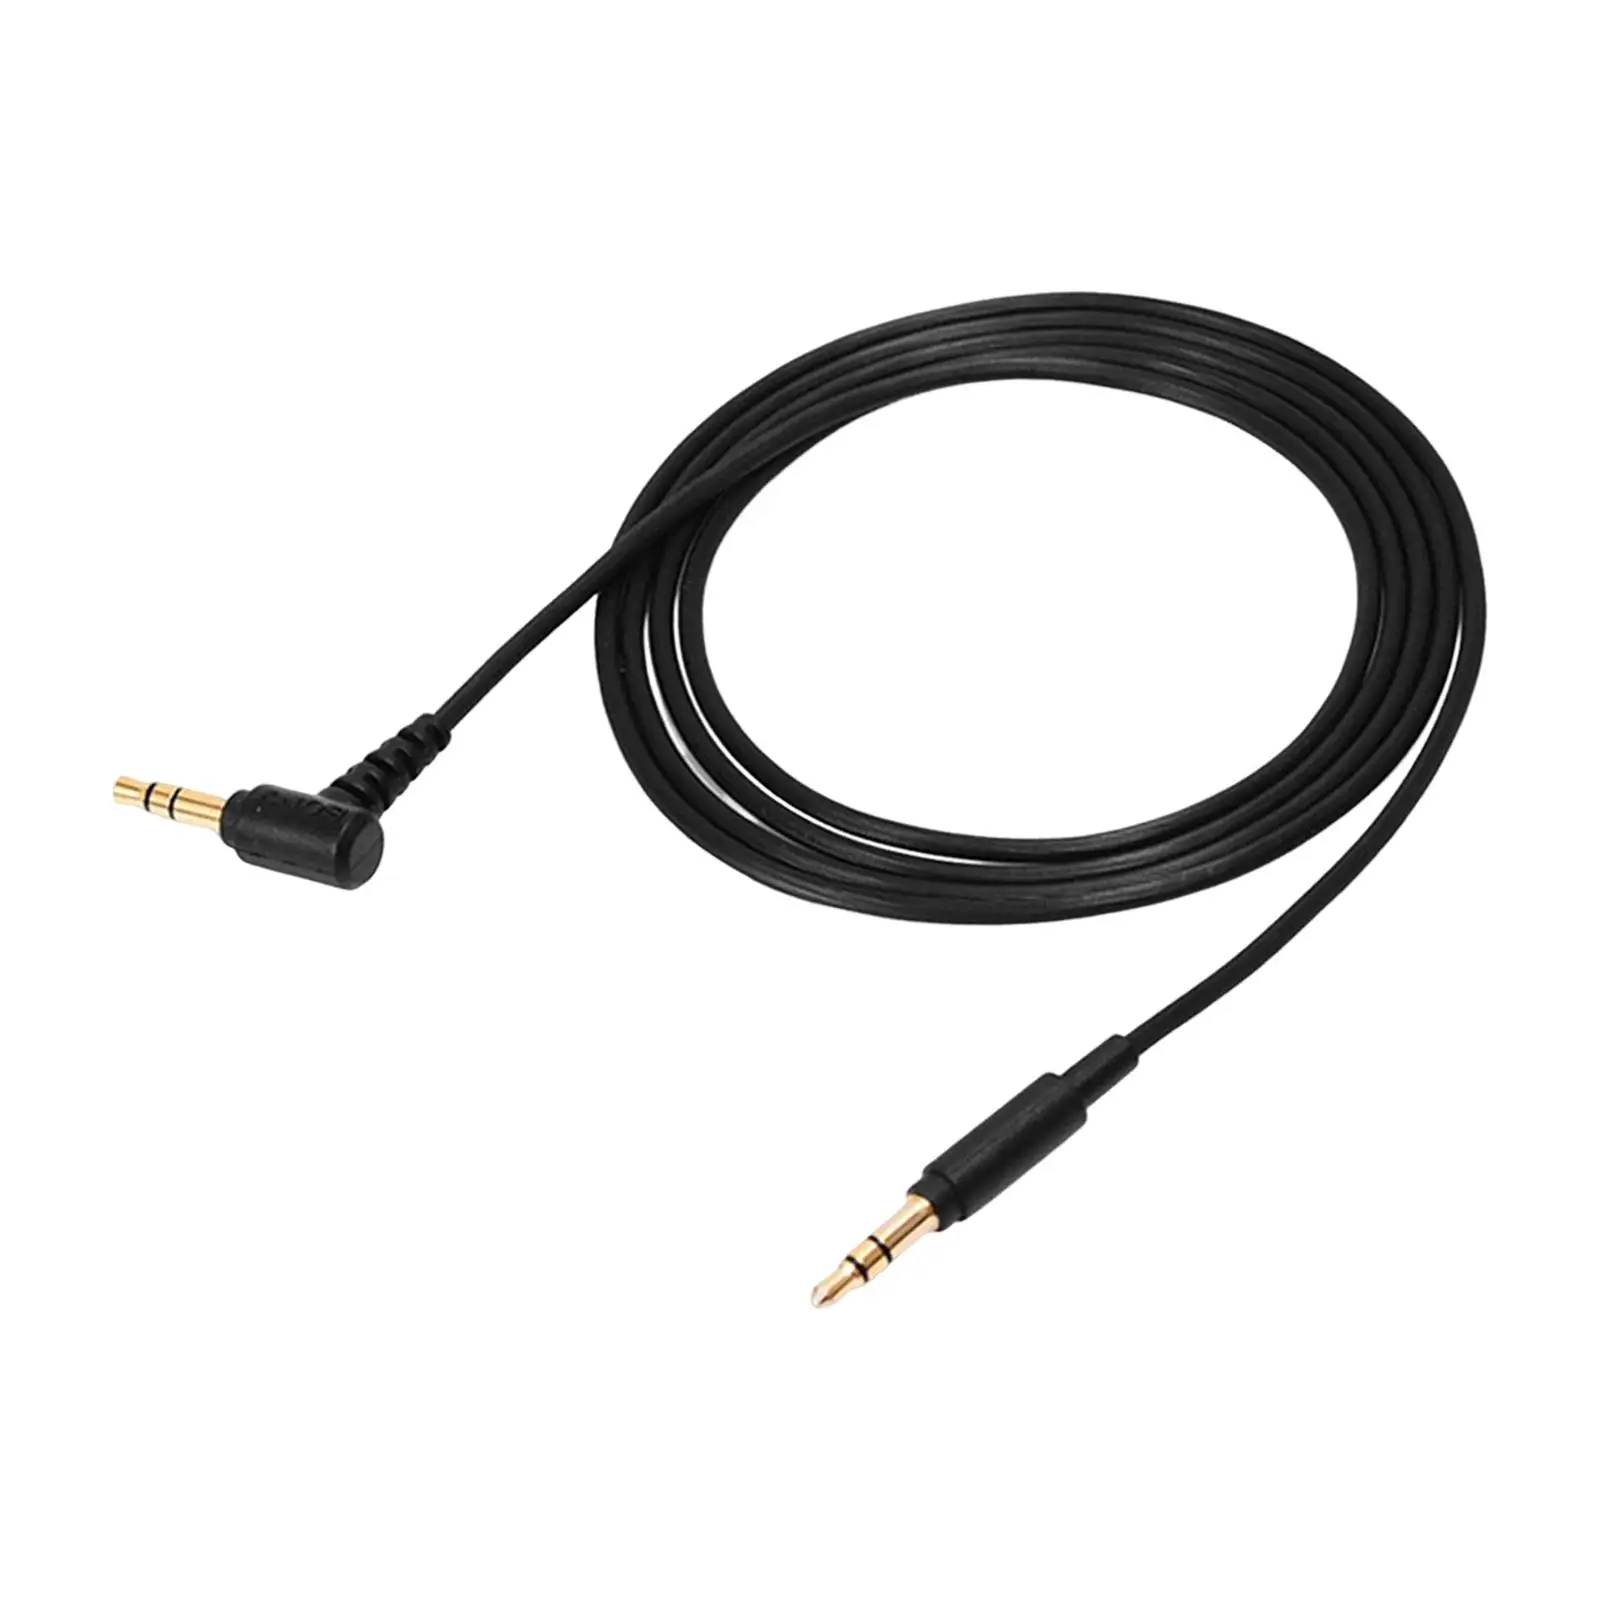 Replacement Audio Cable Cord 3.5mm Jack 4.9ft AUX Wire for Sony WH-1000x Mdr-Xb950BT